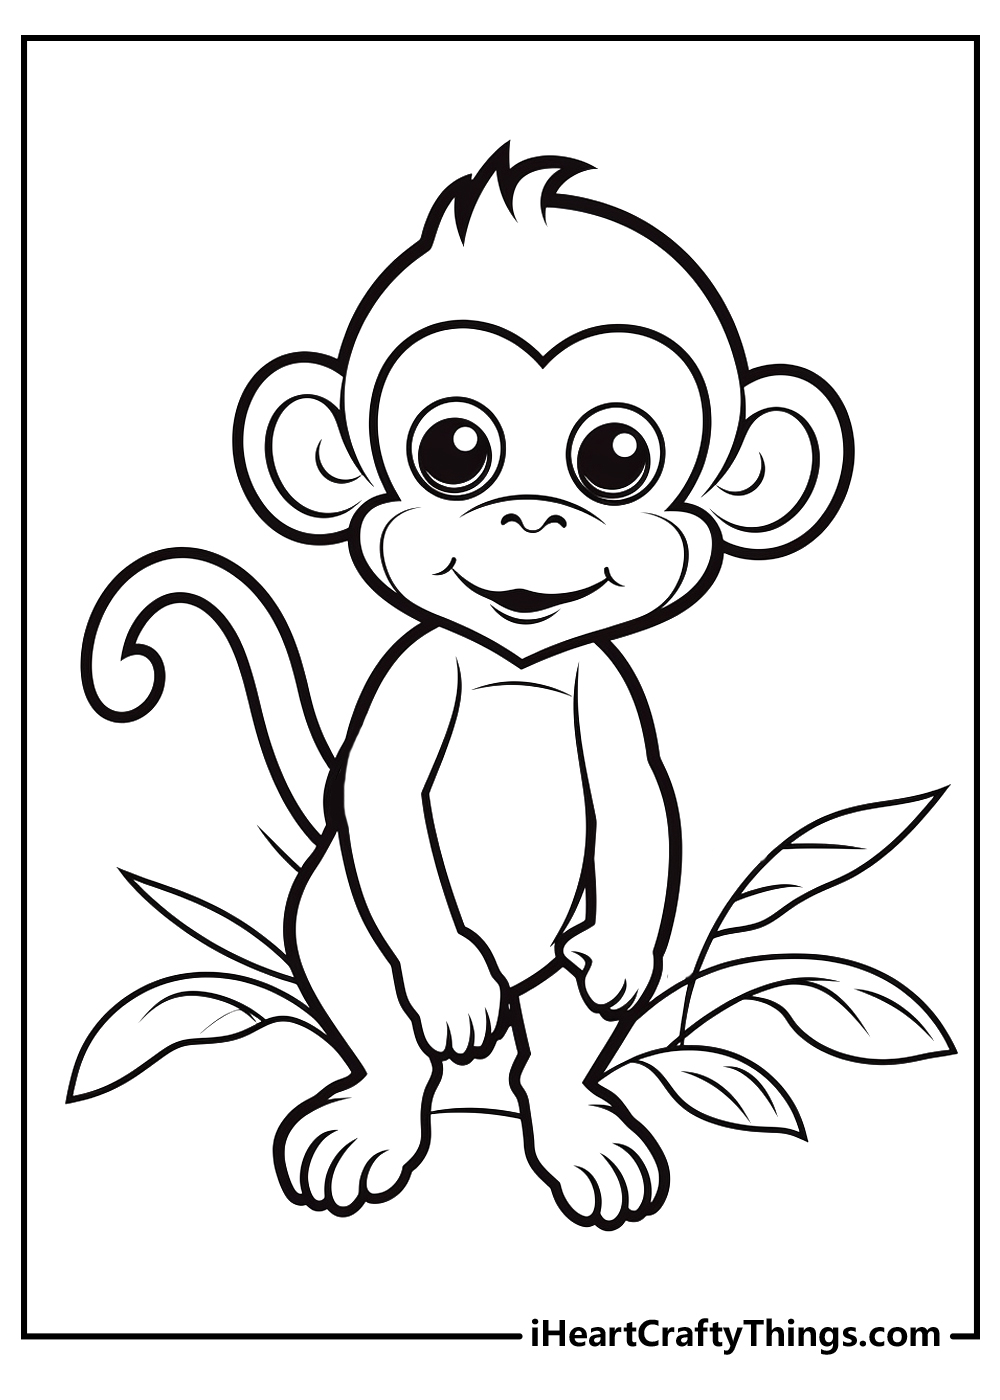 black-and-white monkey coloring pages